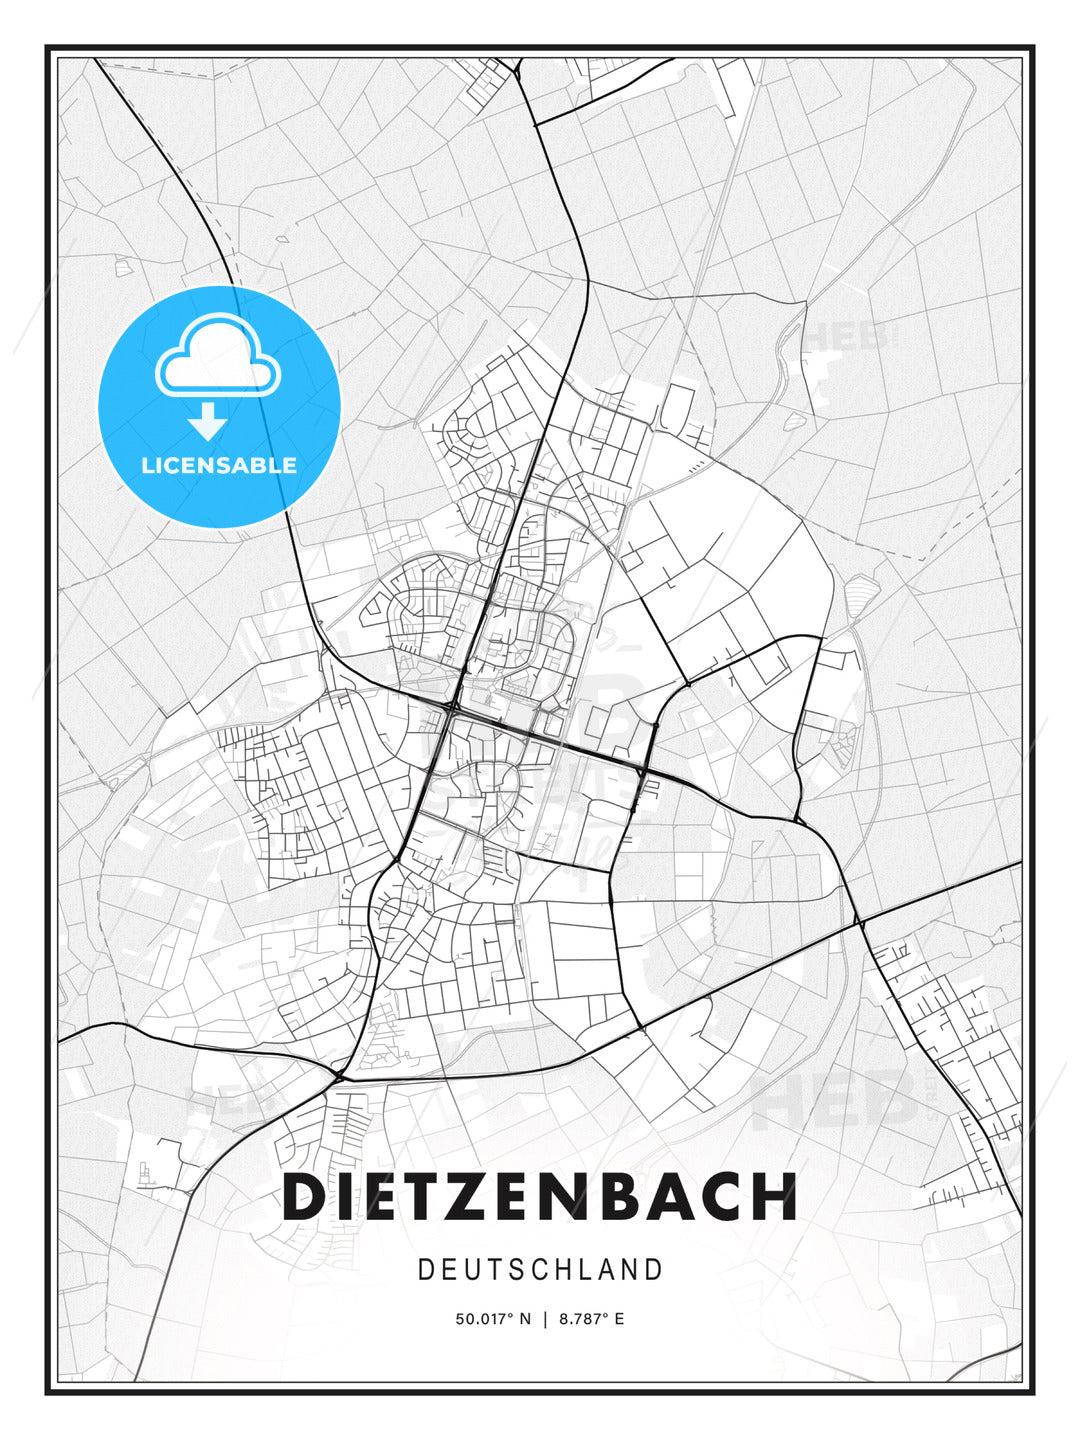 Dietzenbach, Germany, Modern Print Template in Various Formats - HEBSTREITS Sketches